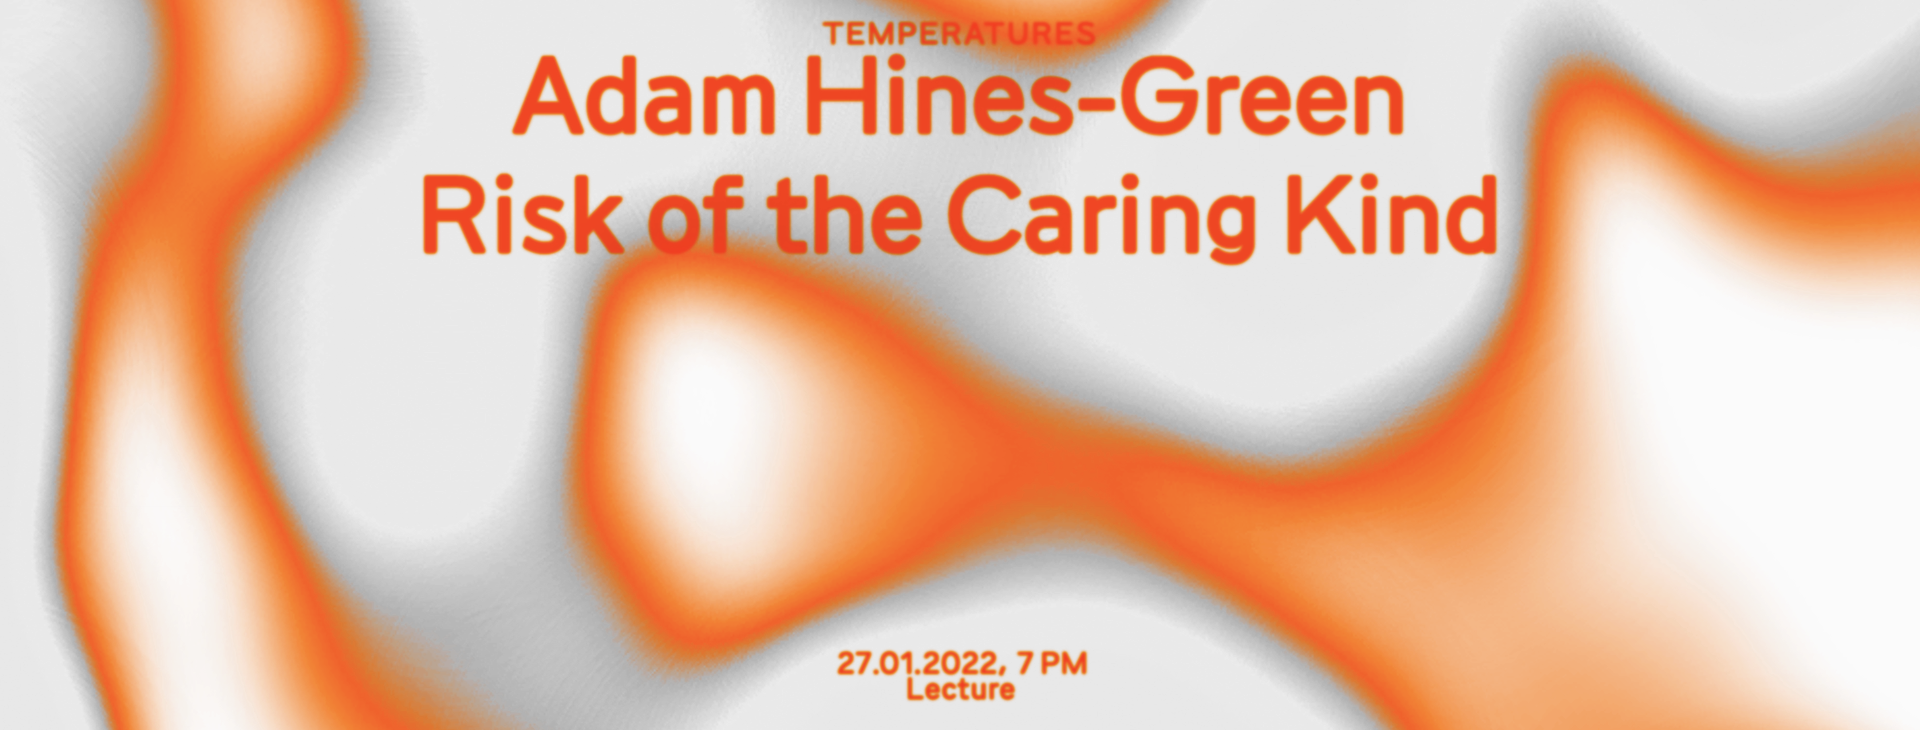 Temperatures VII: Adam Hines-Green – Risk of the Caring Kind